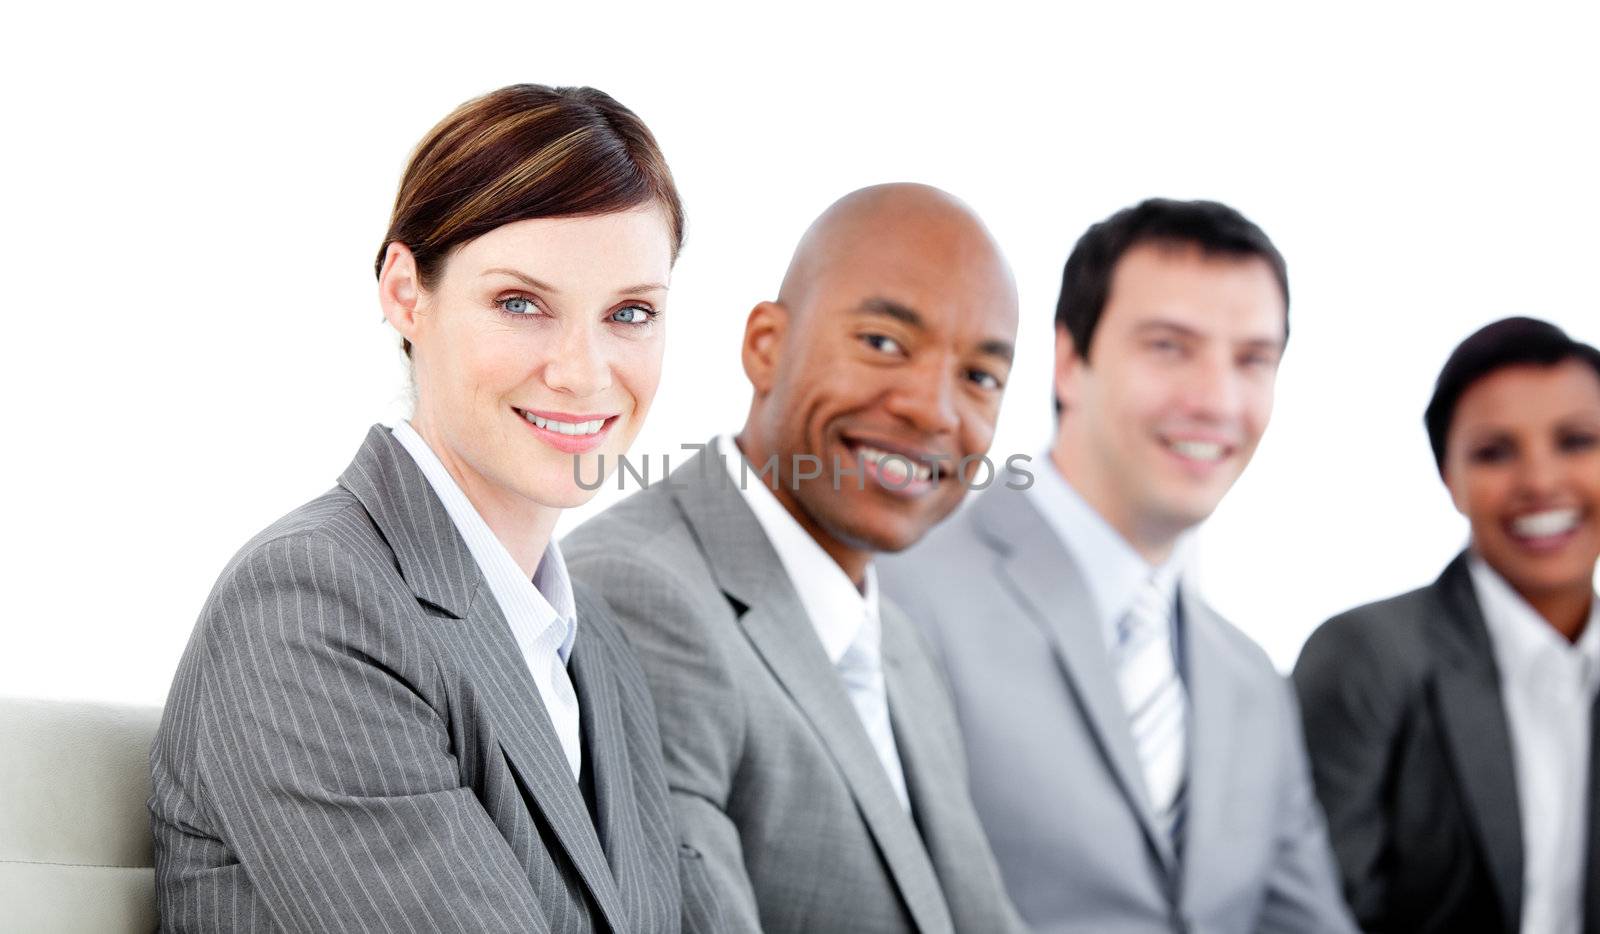 Portrait of smiling business team during a presentation by Wavebreakmedia